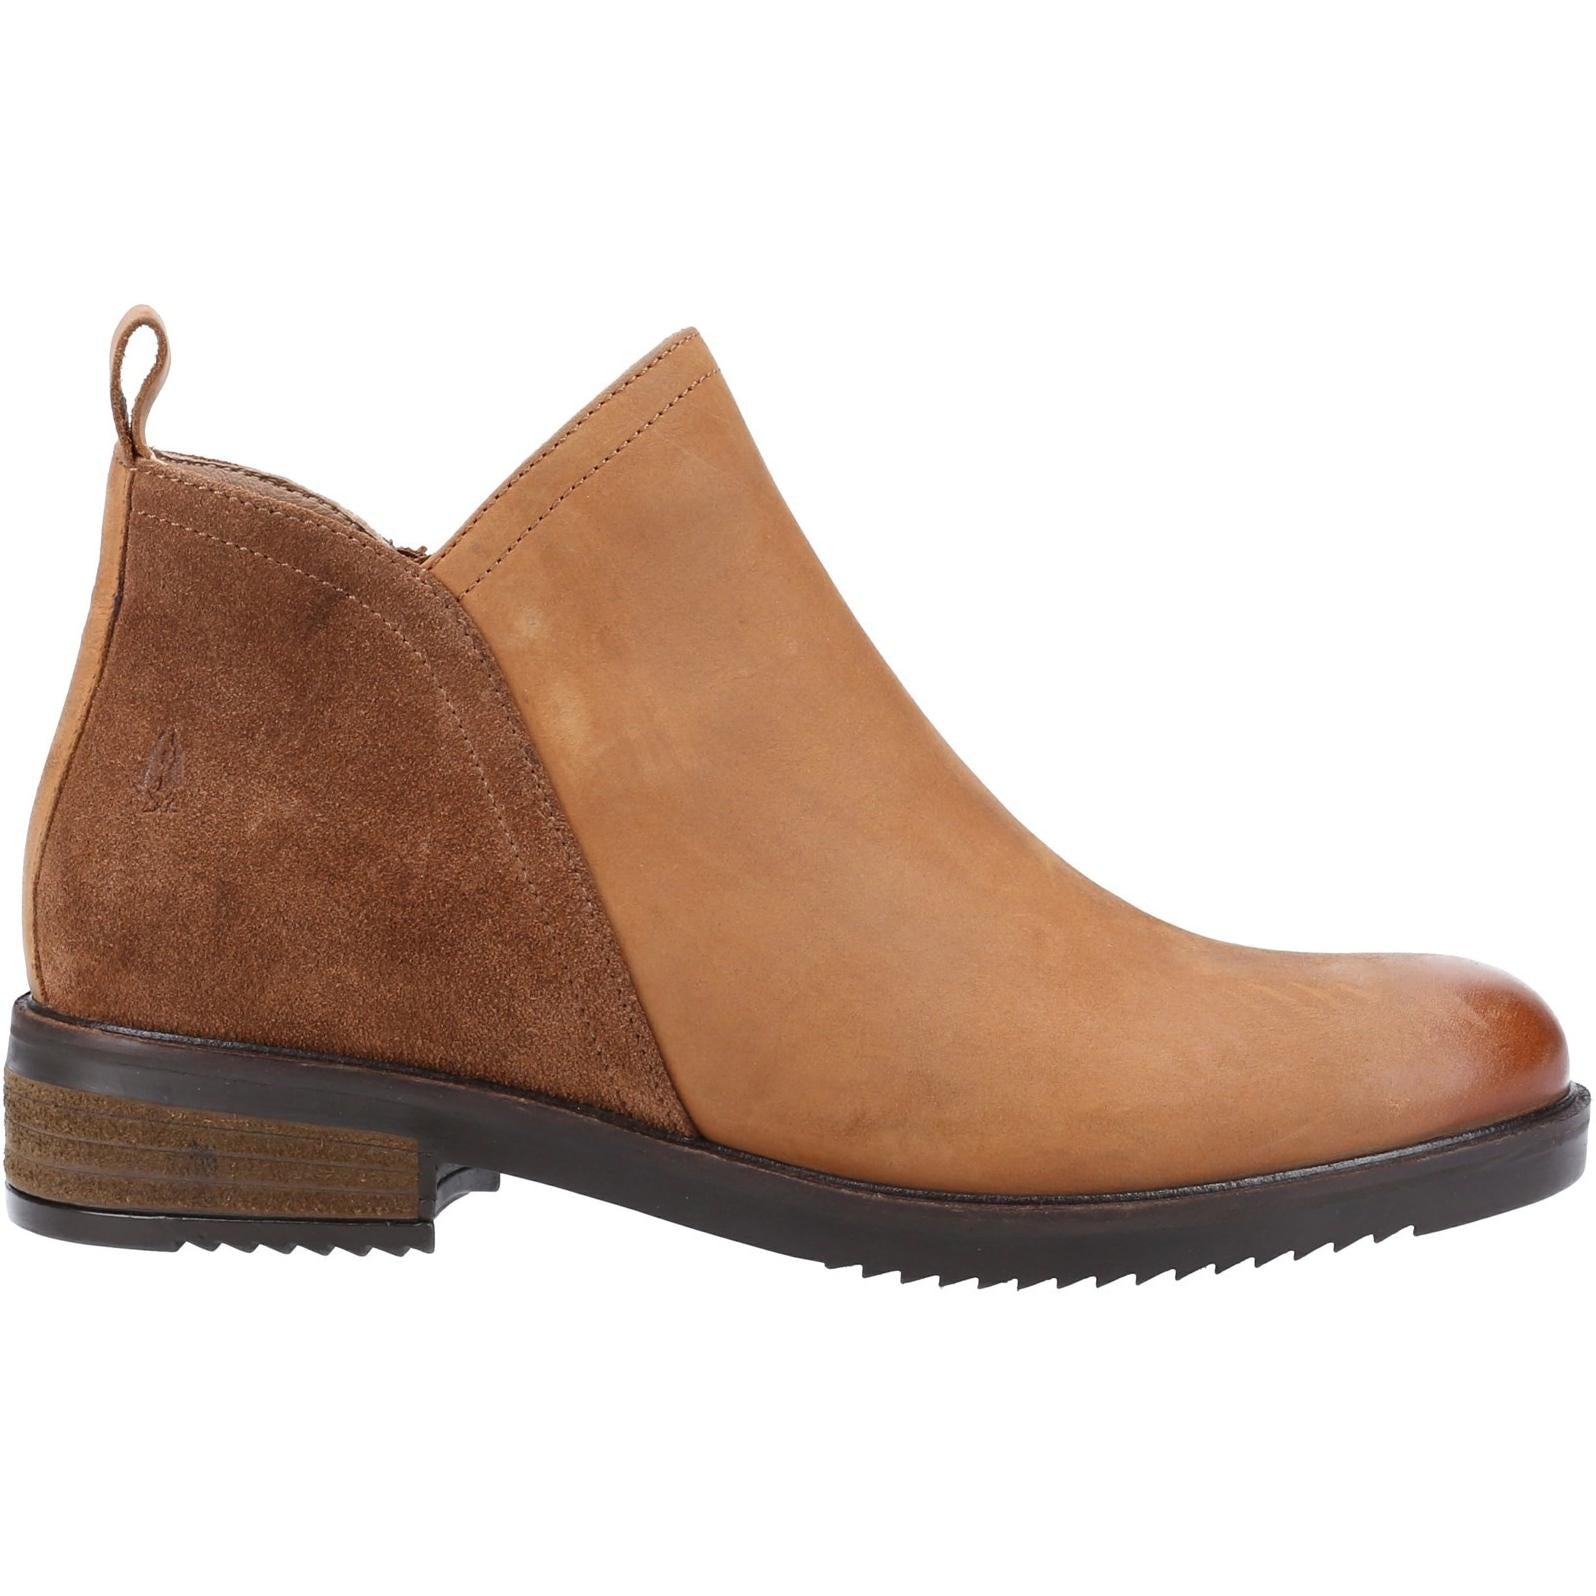 Hush Puppies Alexis Ankle Boot